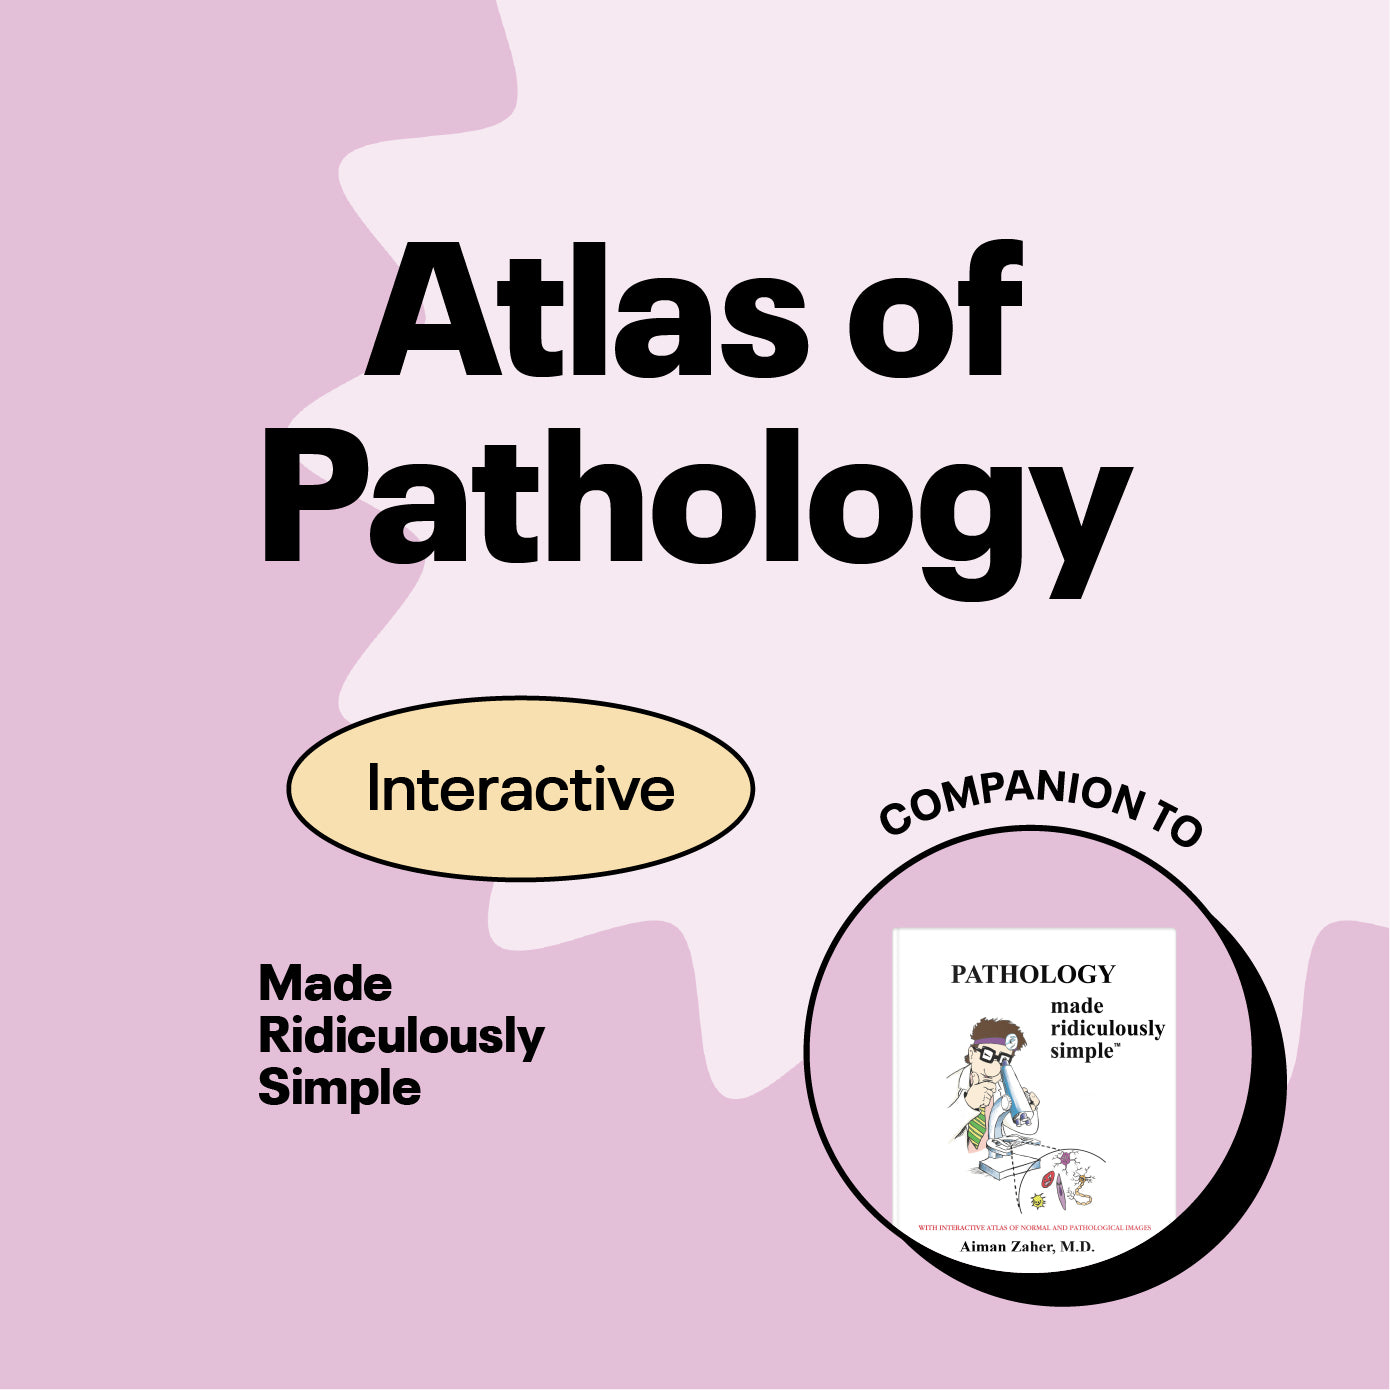 Pathology Made Ridiculously Simple Interactive Atlas